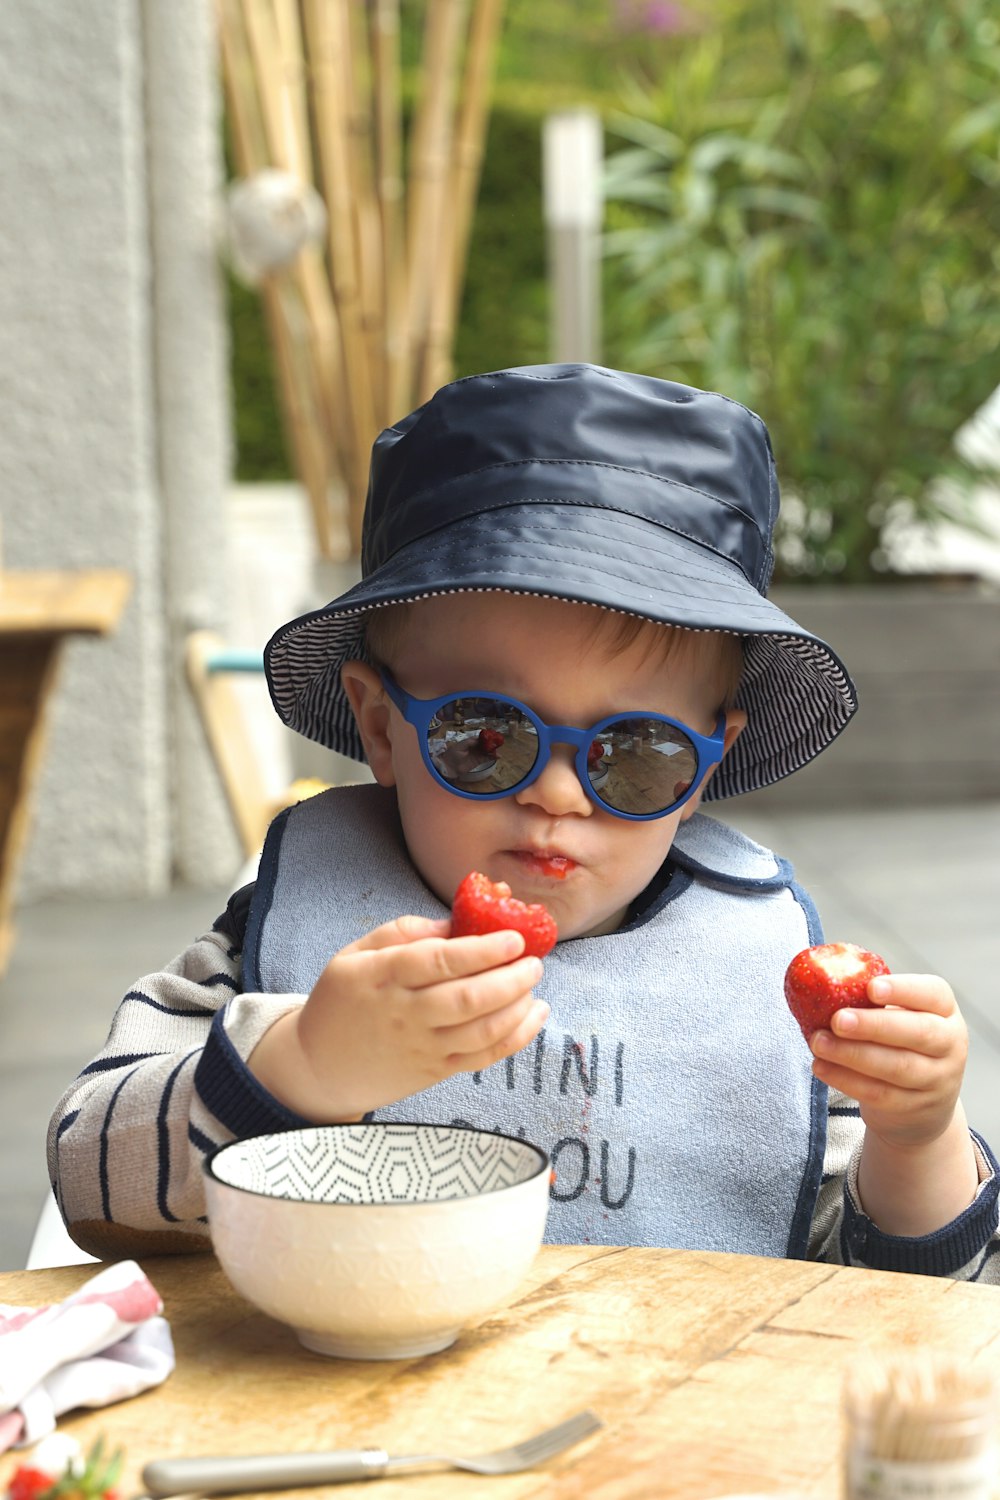 a baby wearing sunglasses and a hat eating a strawberry